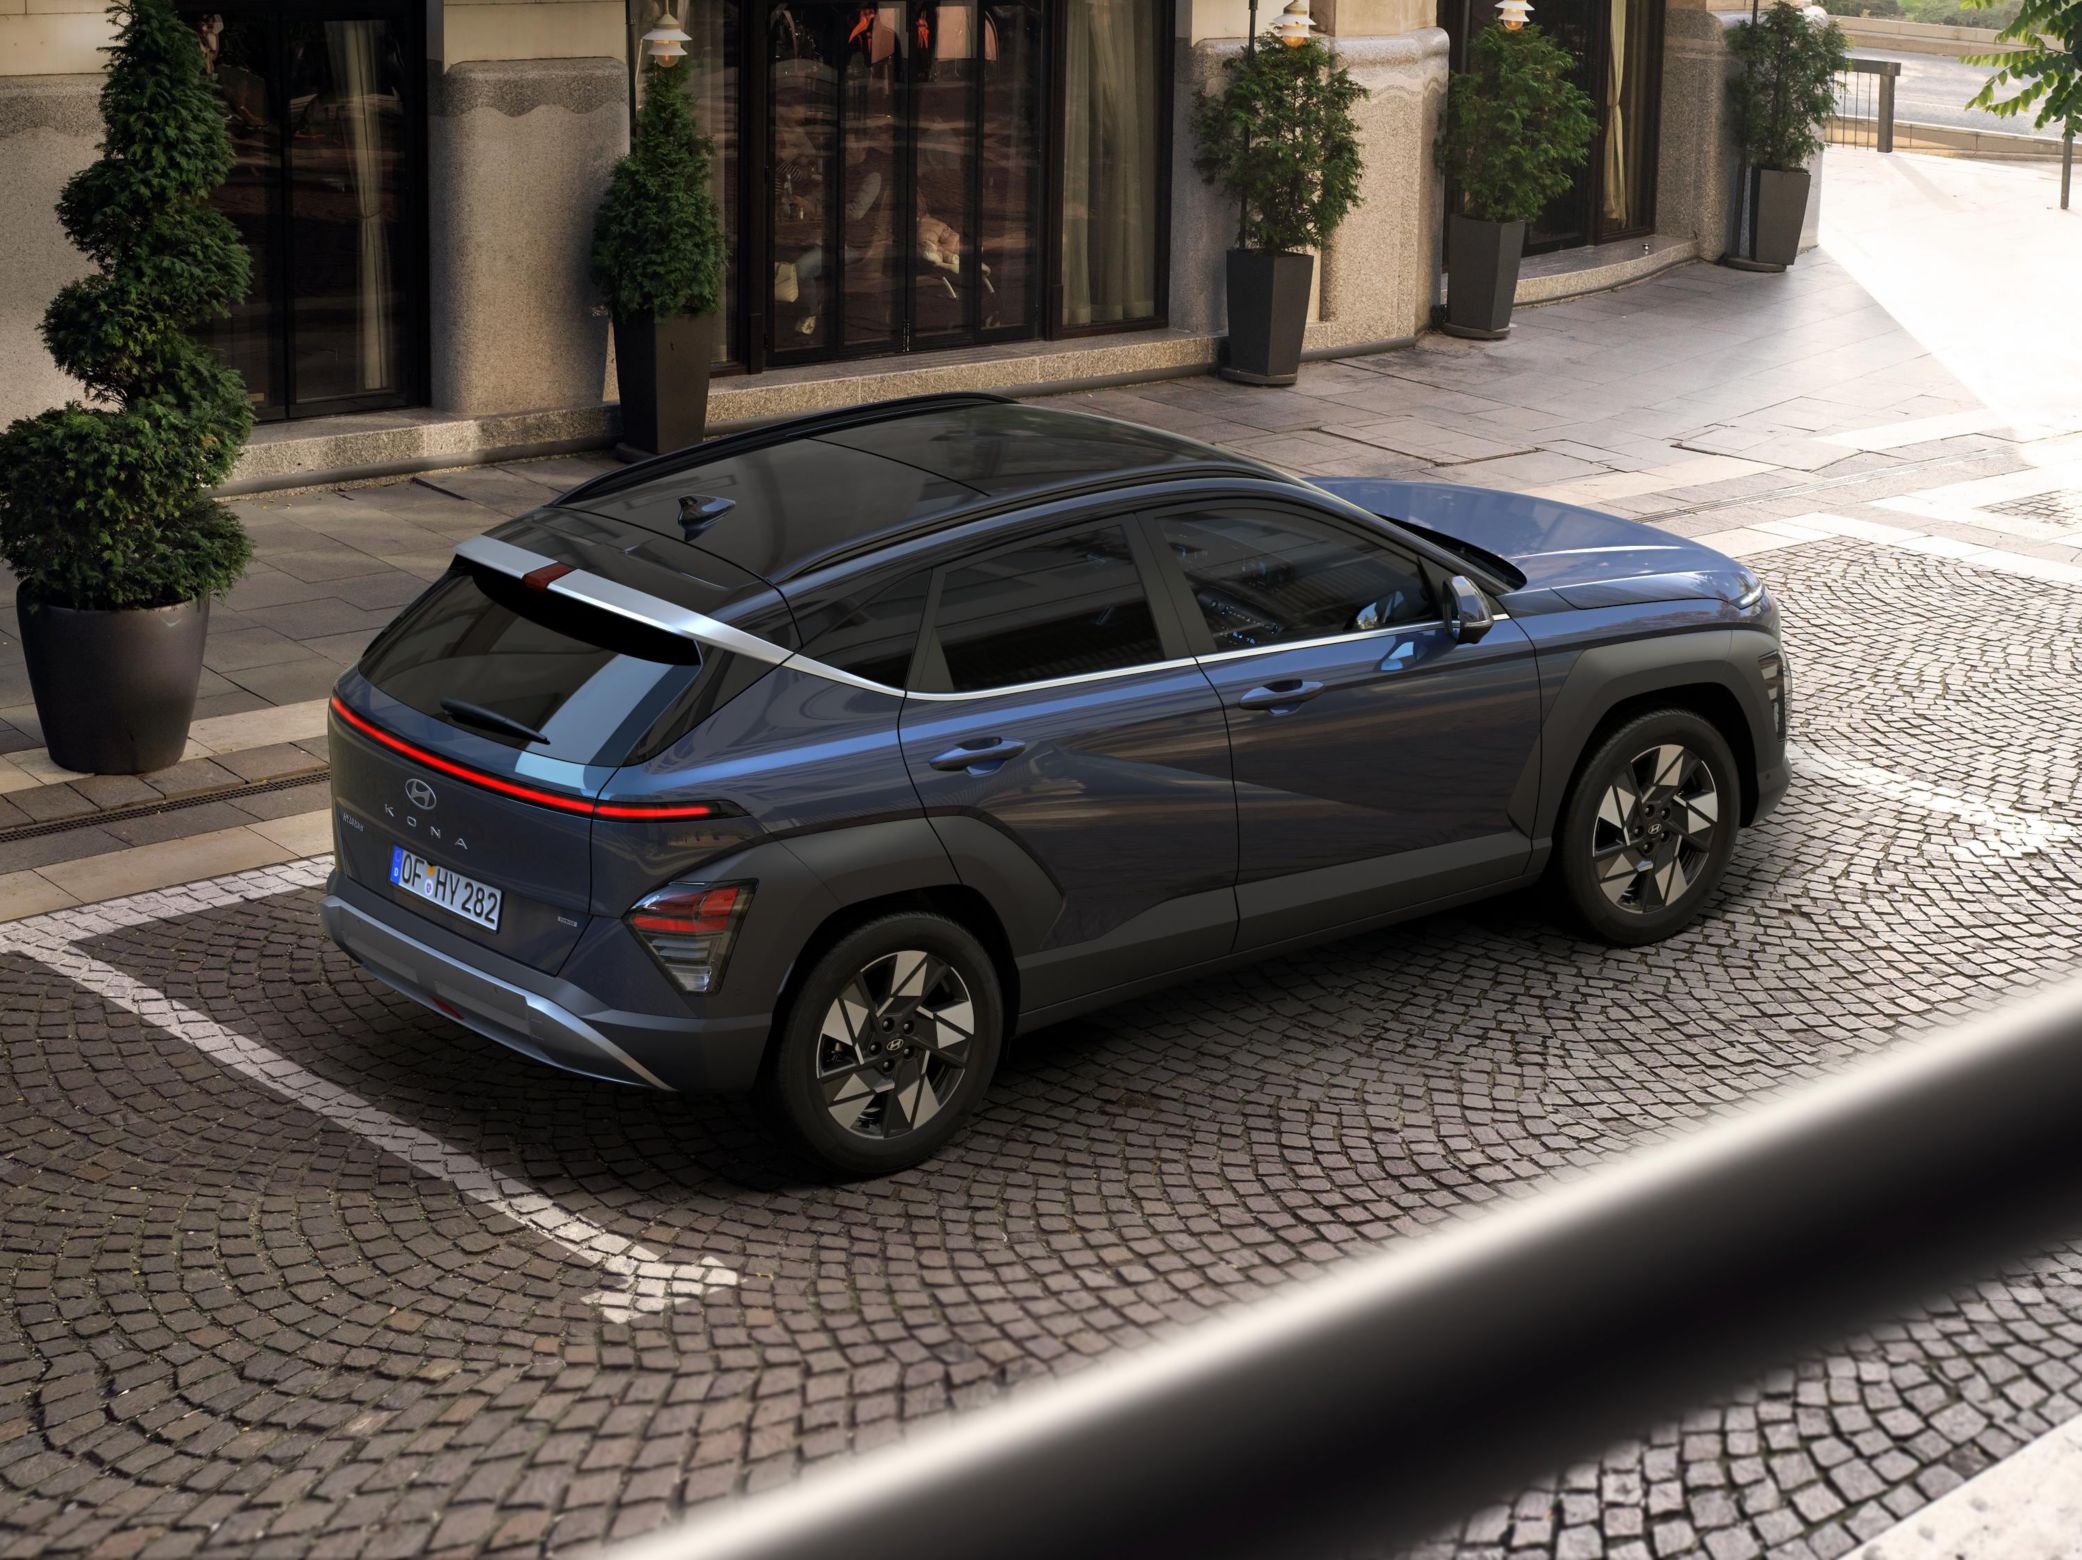 The rear tailgate of the all-new Hyundai KONA Hybrid showing the rear lights.